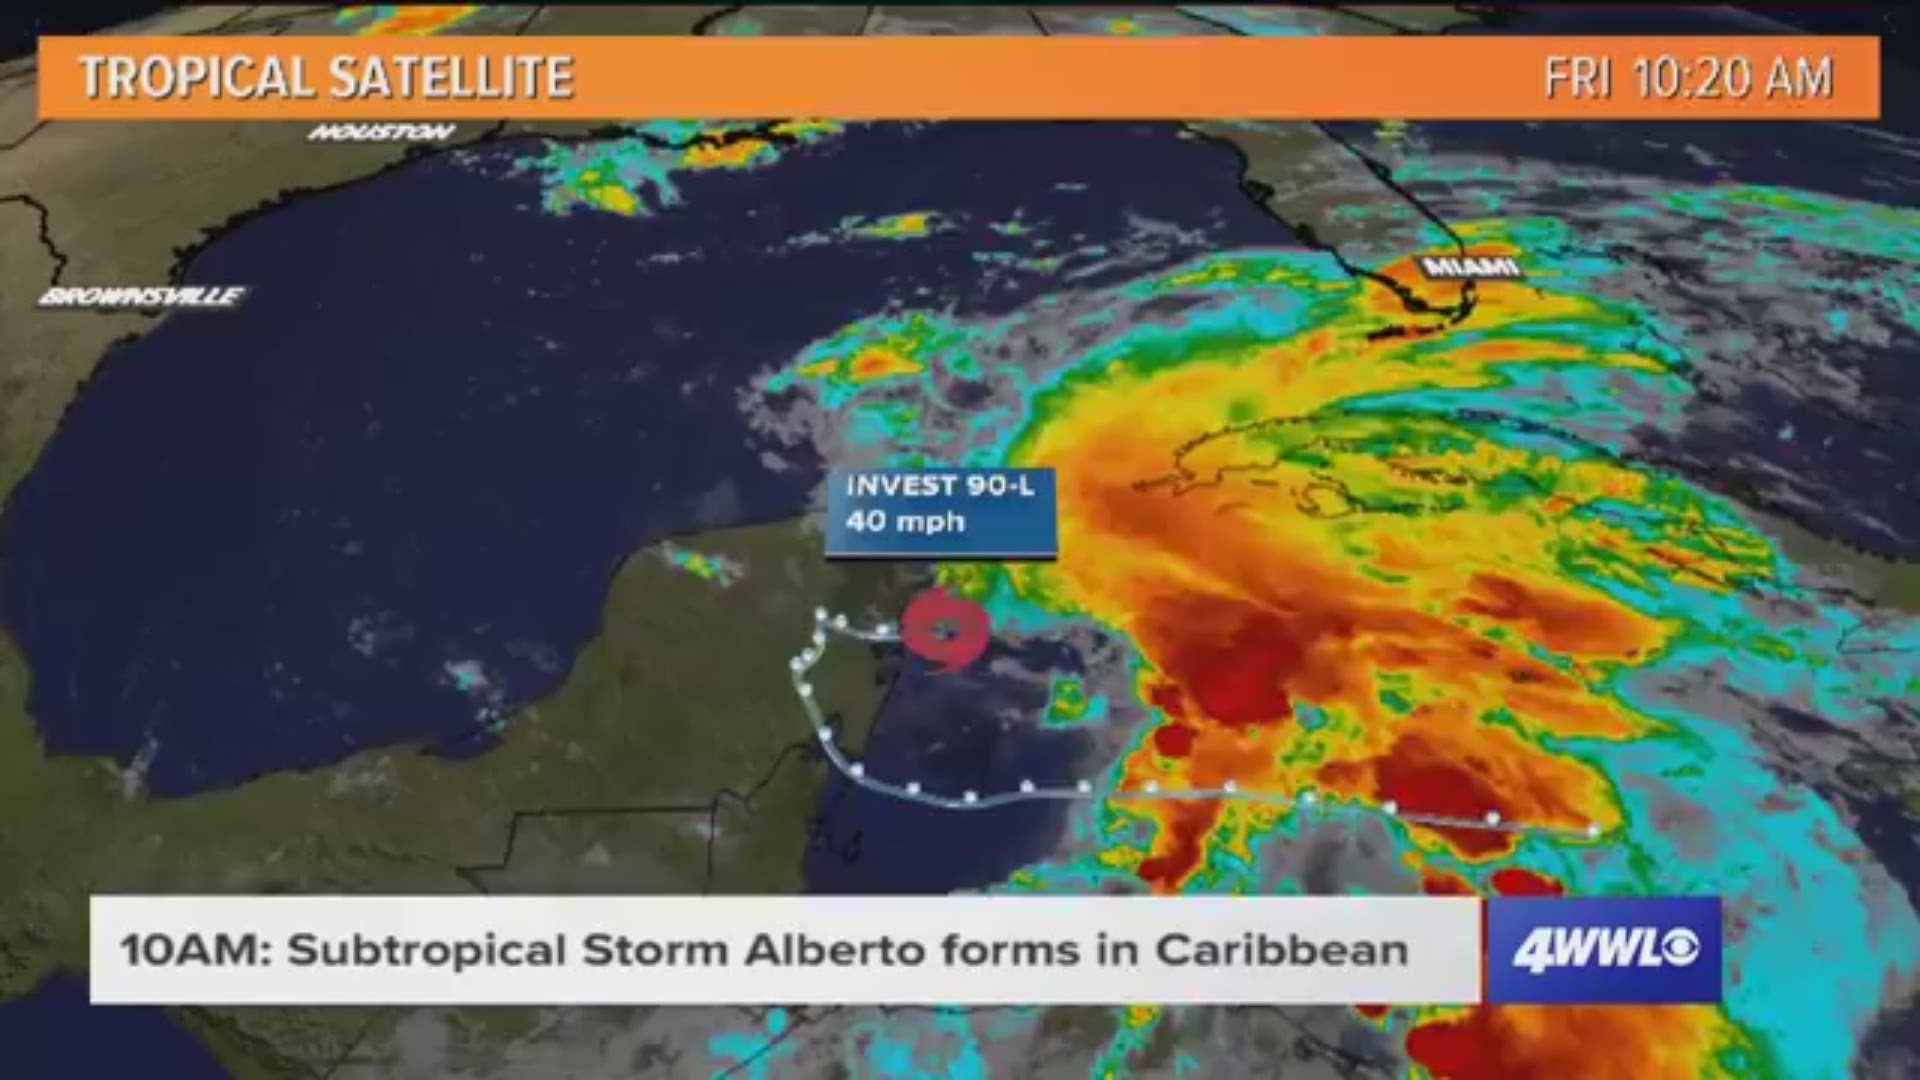 10 AM Update: Subtropical Storm Alberto forms in Caribbean